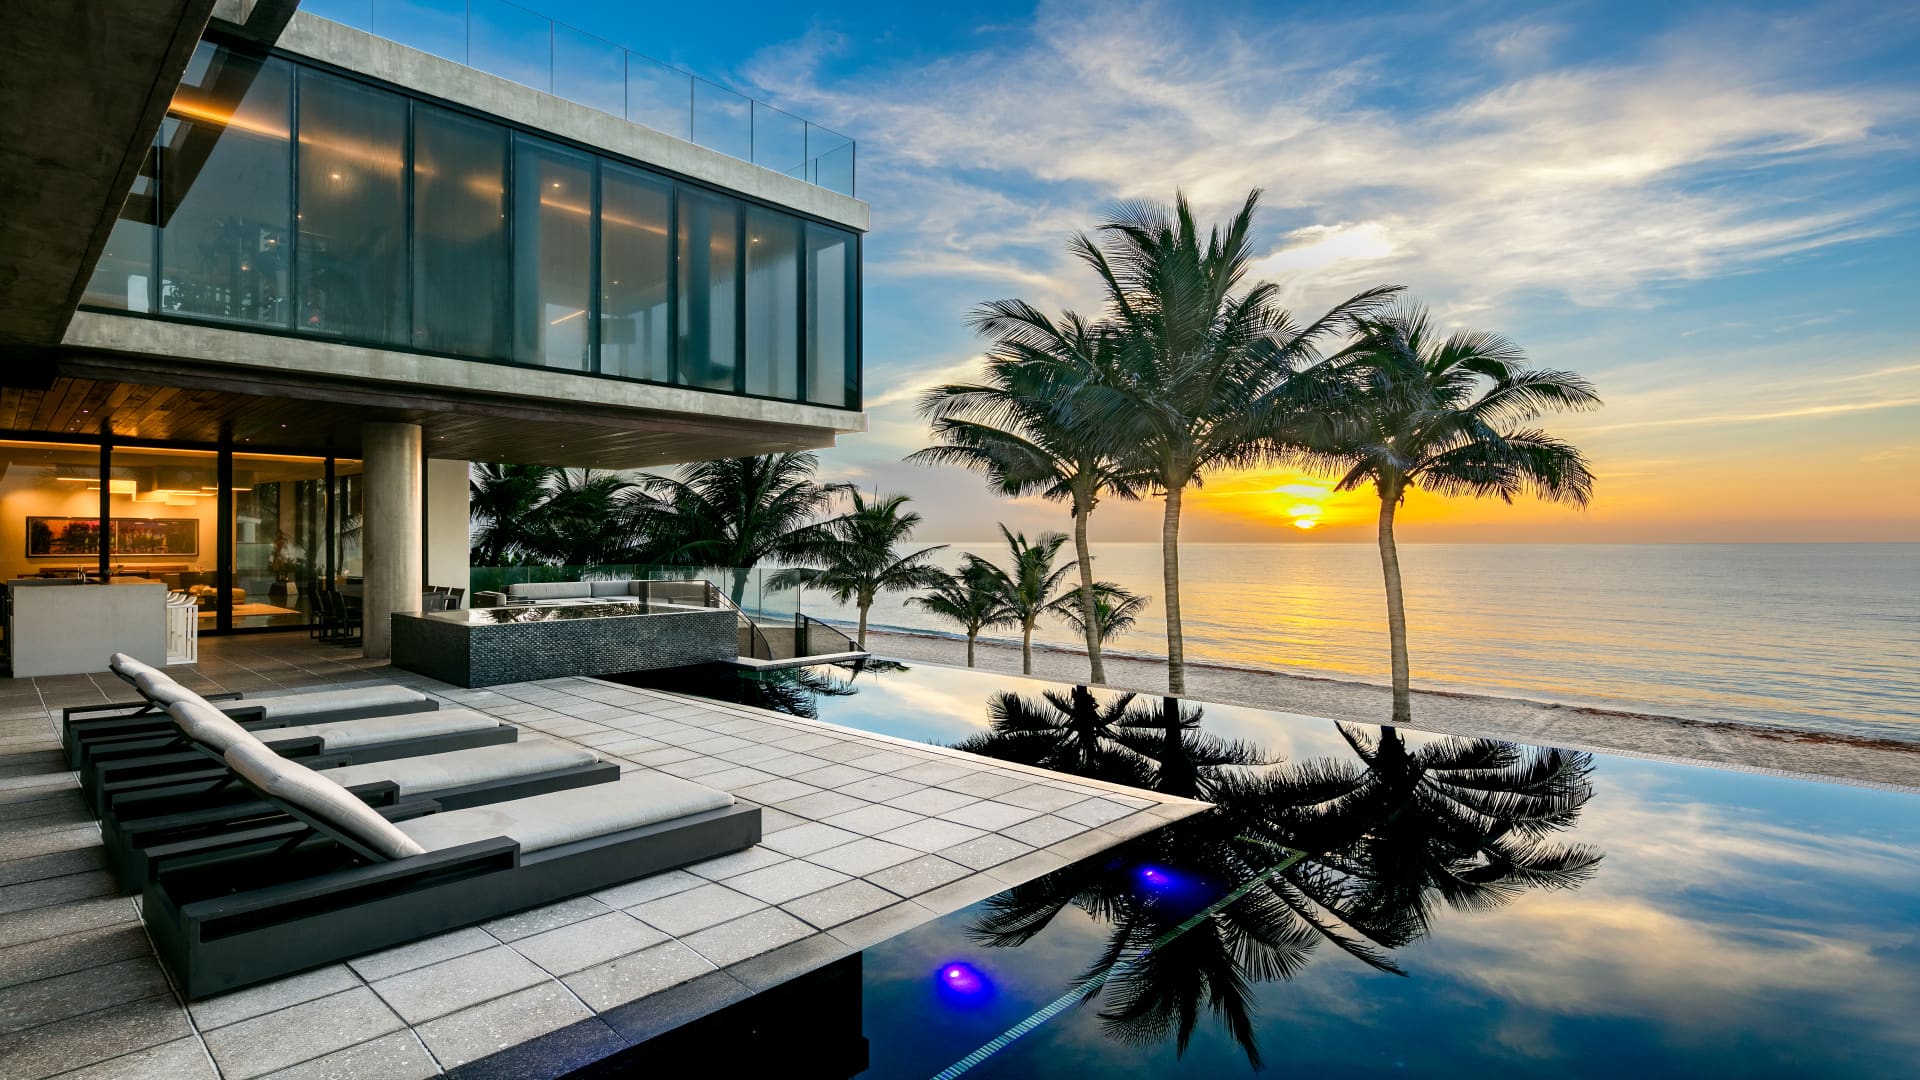 The ocean view from the elevated L-shaped infinity pool on the home's second level.